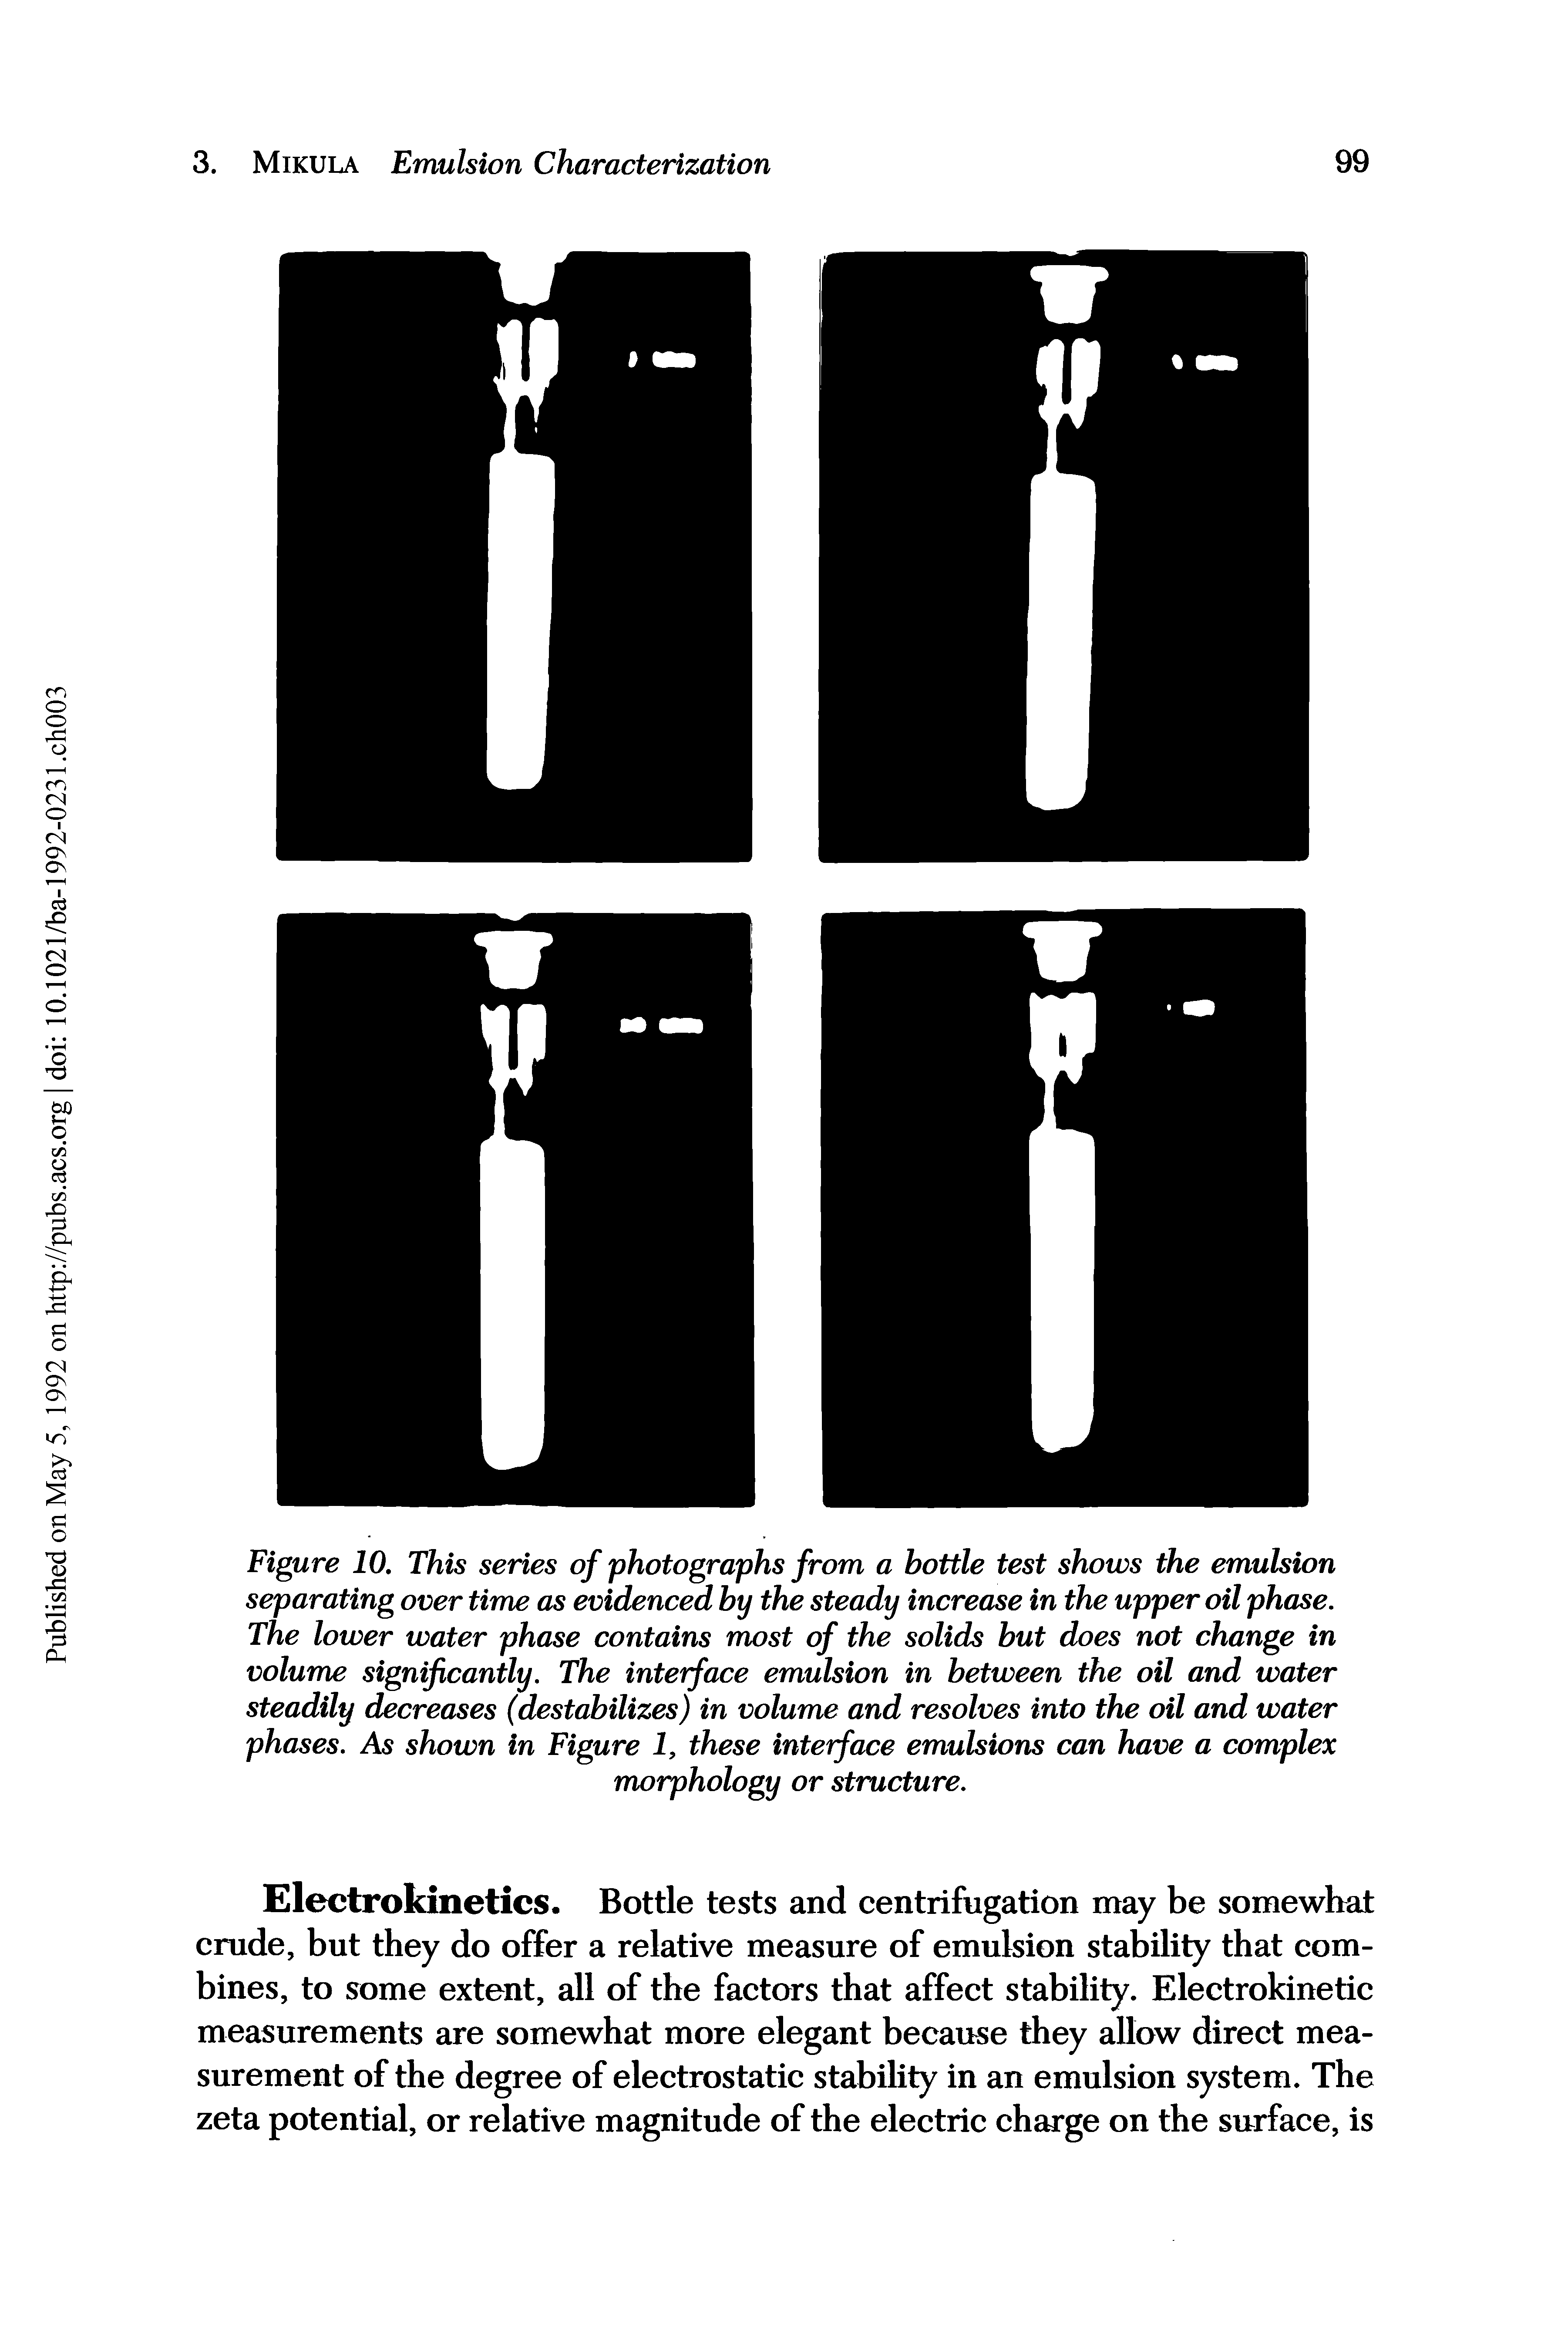 Figure 10. This series of photographs from a bottle test shows the emulsion separating over time as evidenced by the steady increase in the upper oil phase. The lower water phase contains most of the solids but does not change in volume significantly. The interface emulsion in between the oil and water steadily decreases (destabilizes) in volume and resolves into the oil and water phases. As shown in Figure J, these interface emulsions can have a complex morphology or structure.